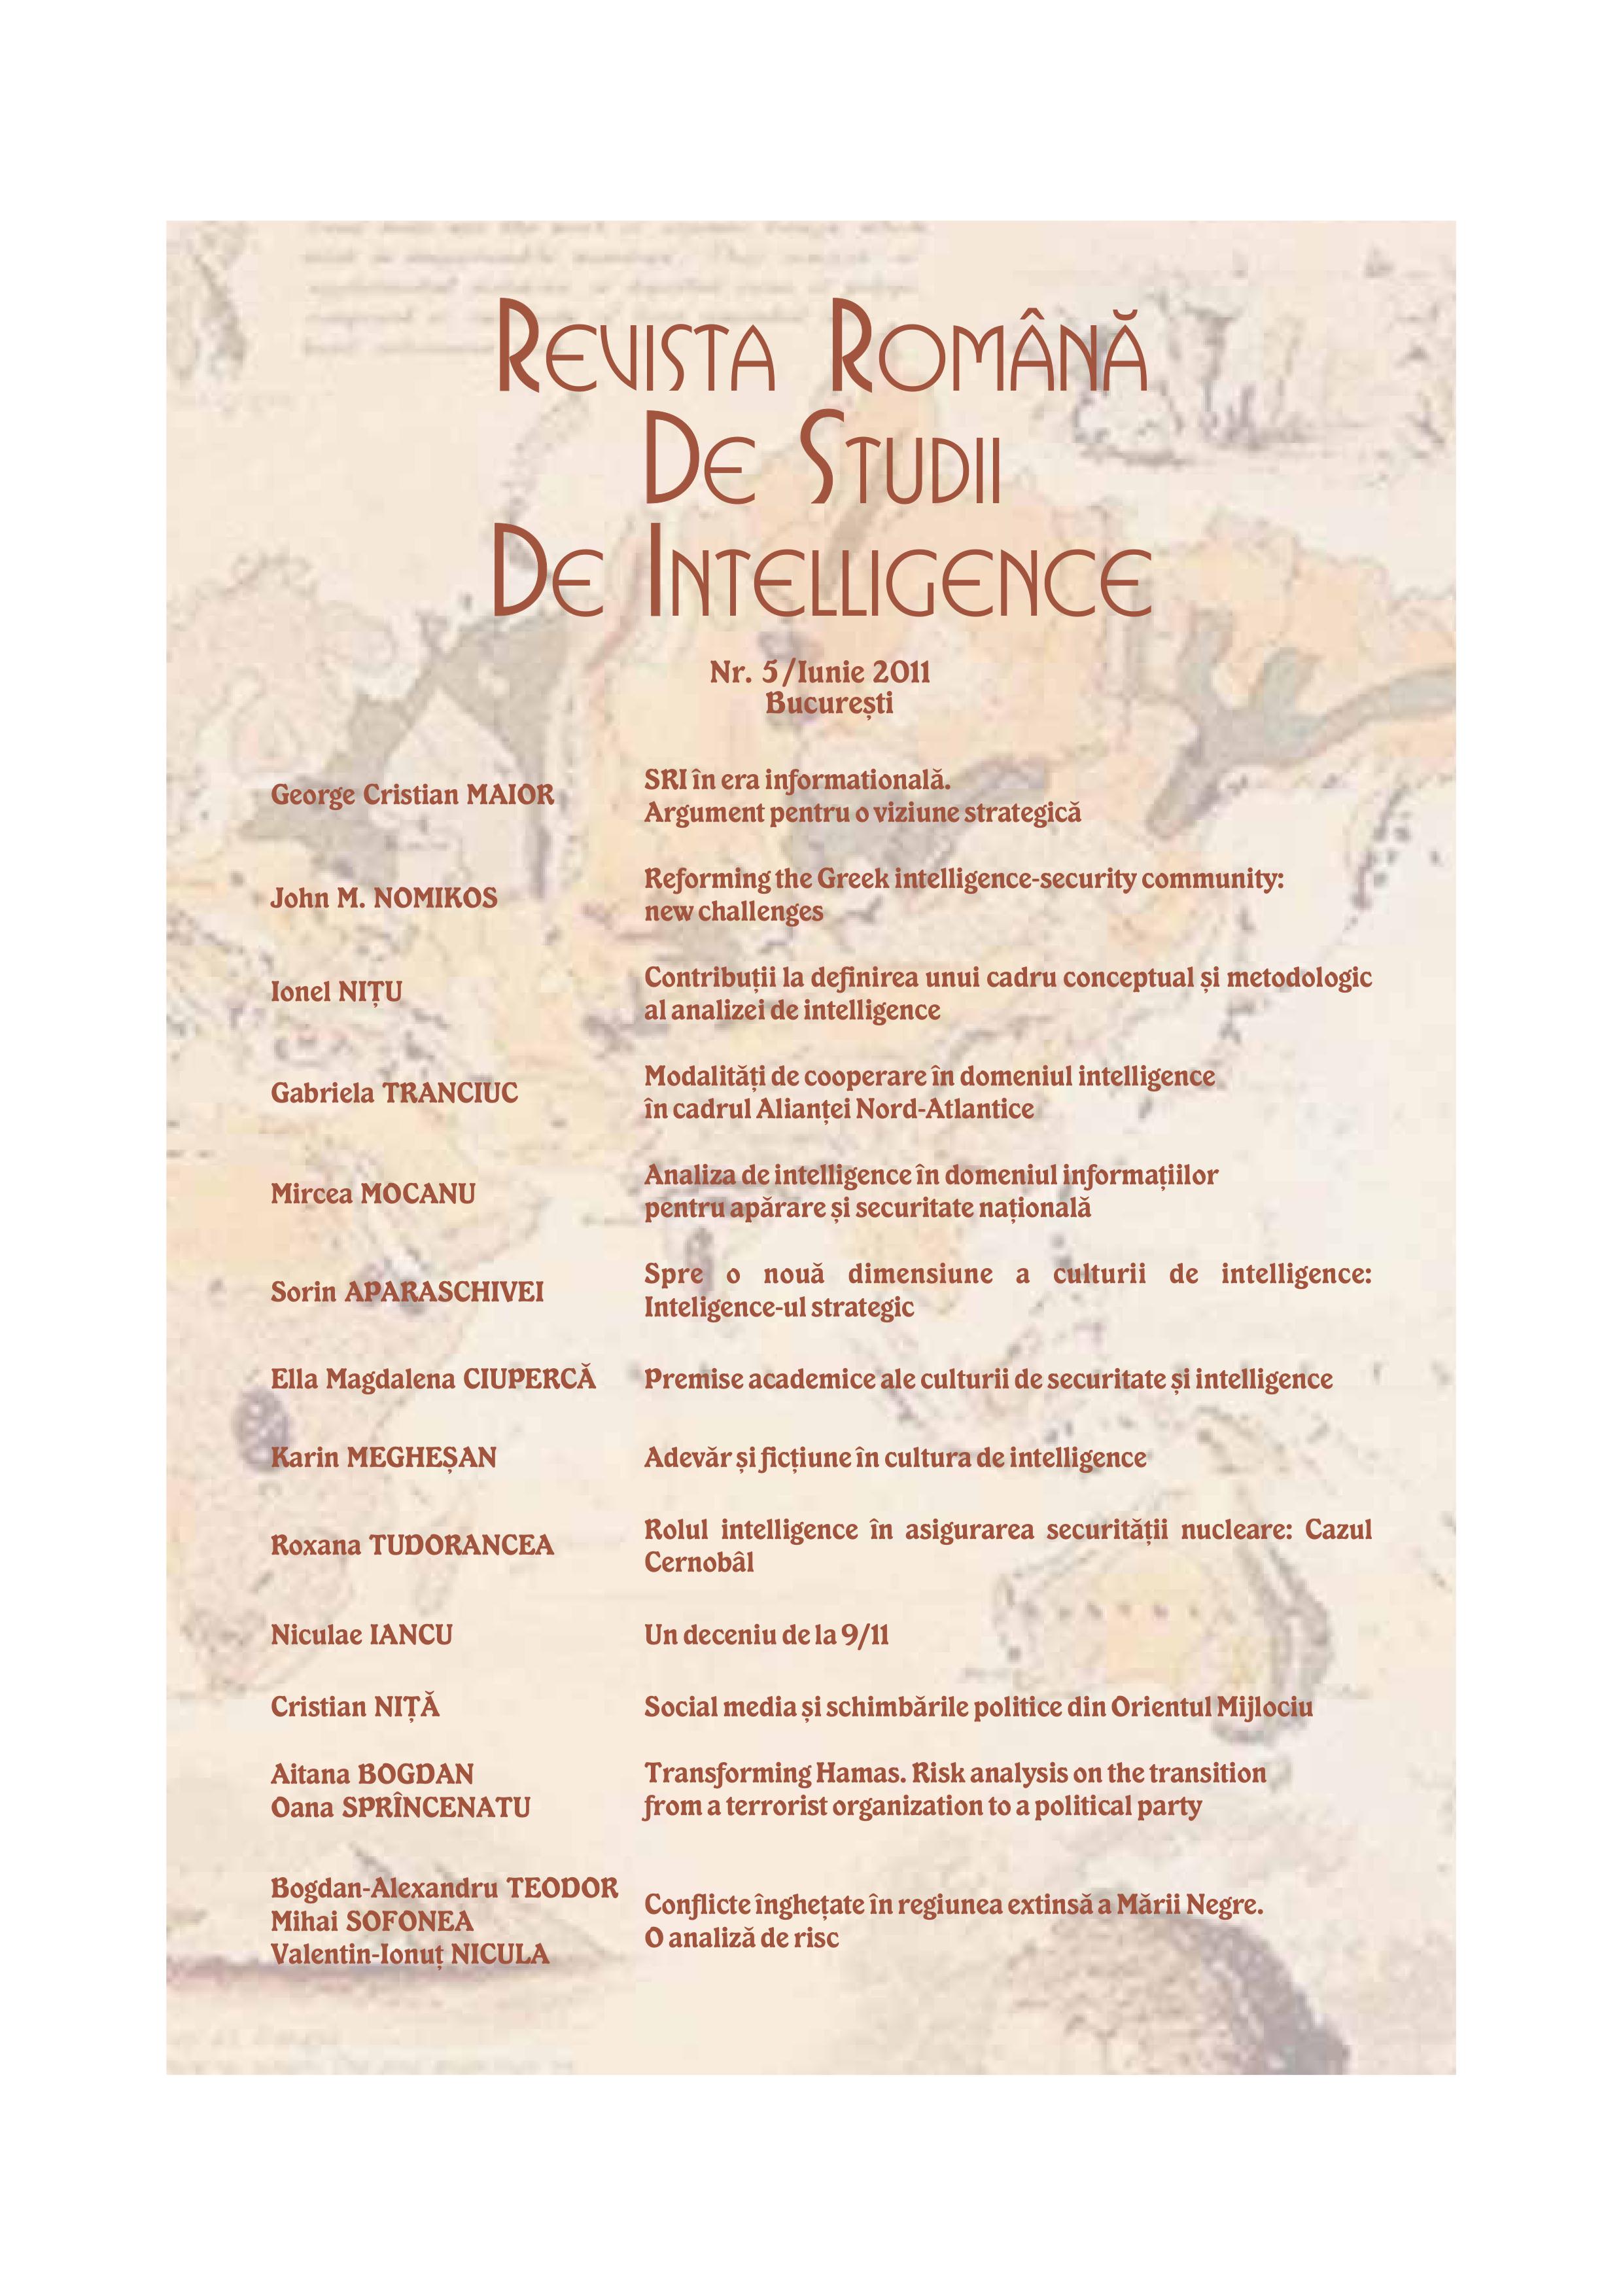 Contributions to defining the conceptual and methodological framework for intelligence analysis Cover Image